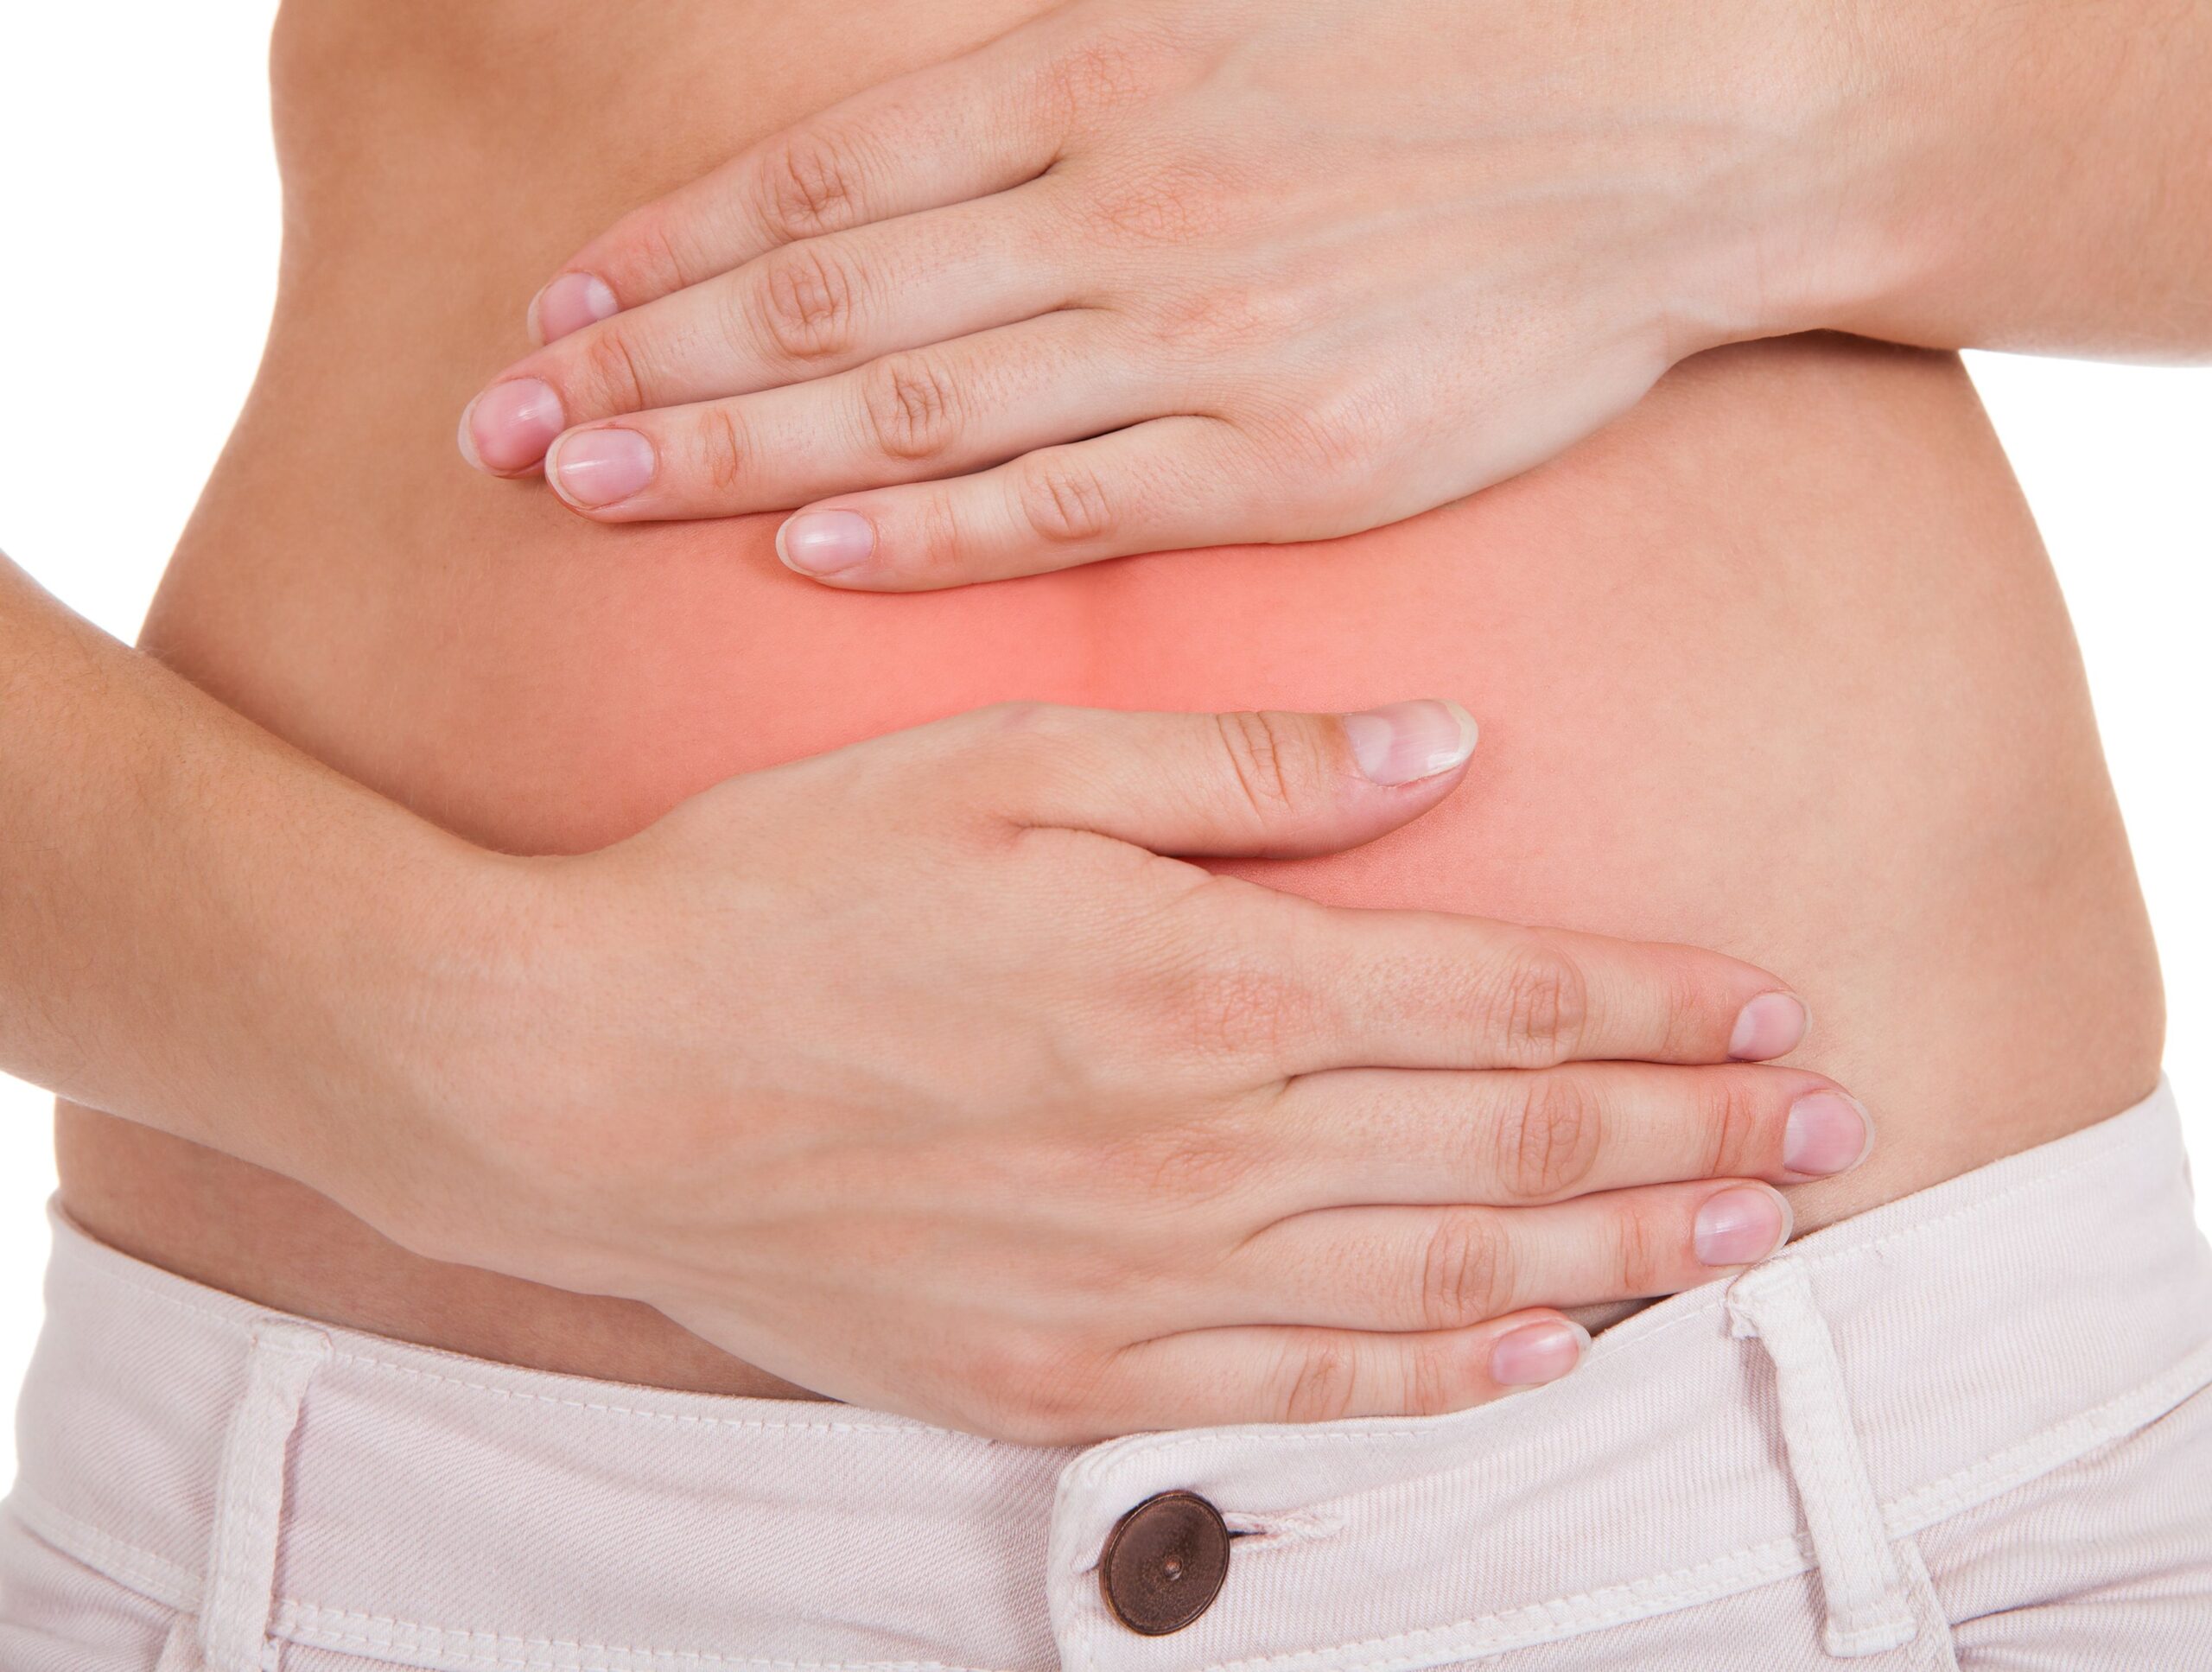 Reasons Why You Have Chronic Pelvic Pain